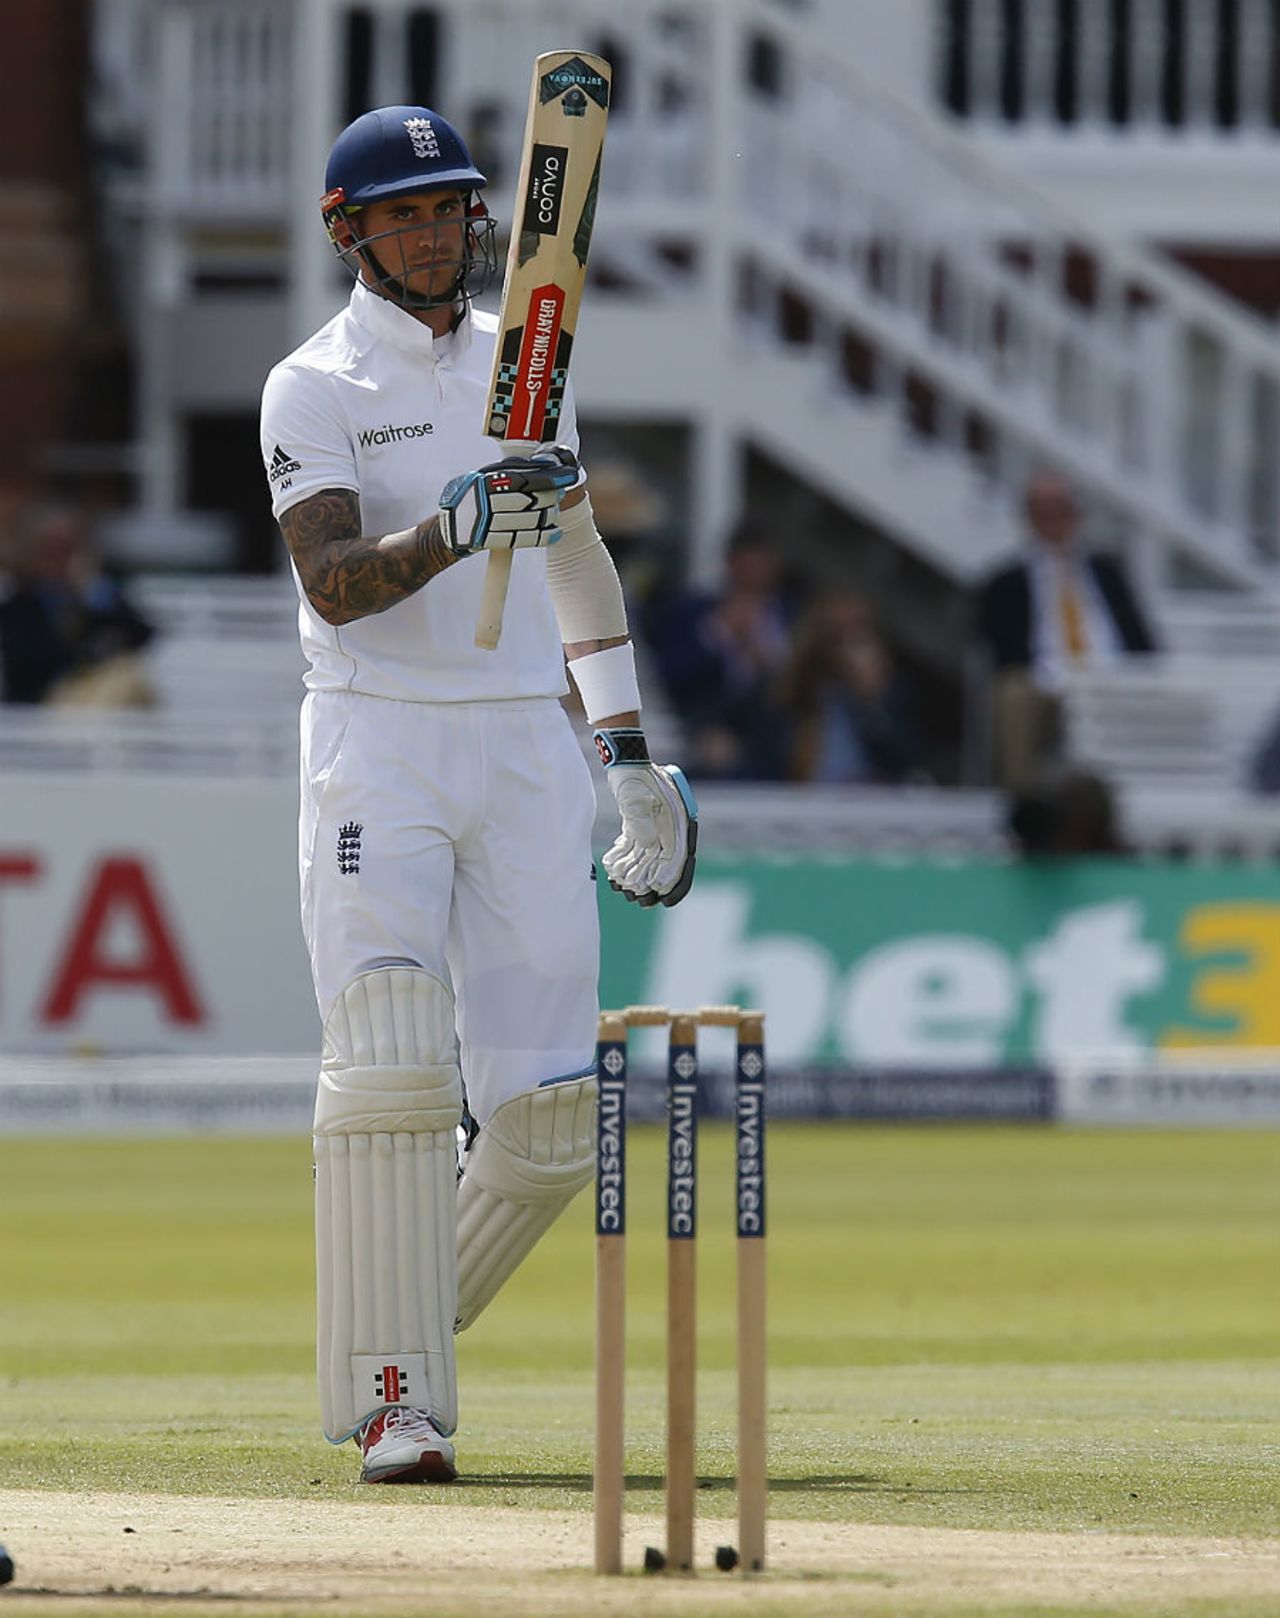 Alex Hales brought up his third fifty of the series, England v Sri Lanka, 3rd Investec Test, Lord's, 4th day, June 12, 2016